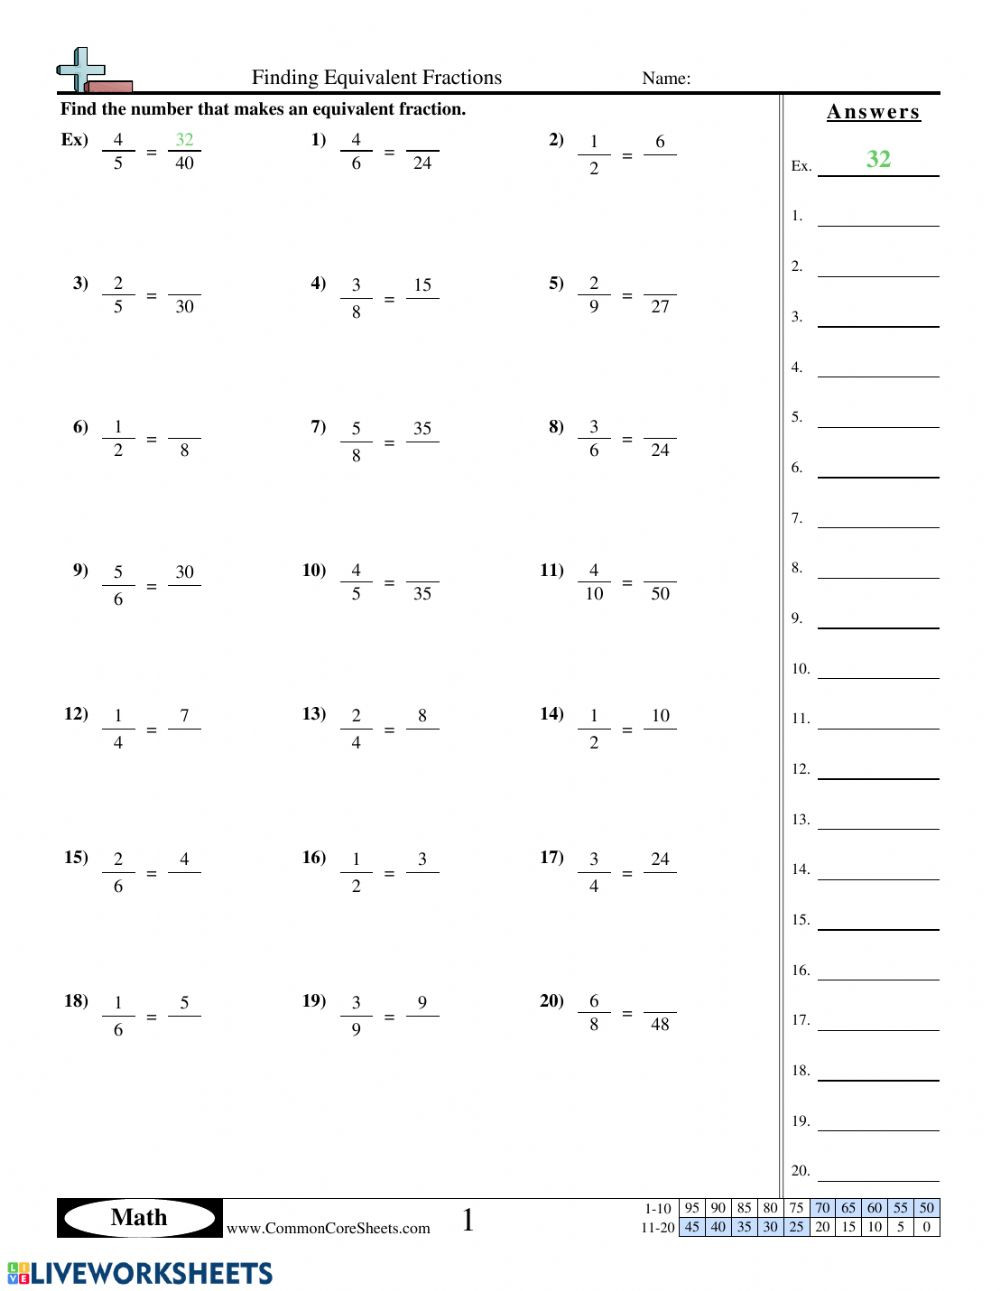 Equivalent Fractions Worksheets 5th Grade Finding Equivalent Fractions Interactive Worksheet